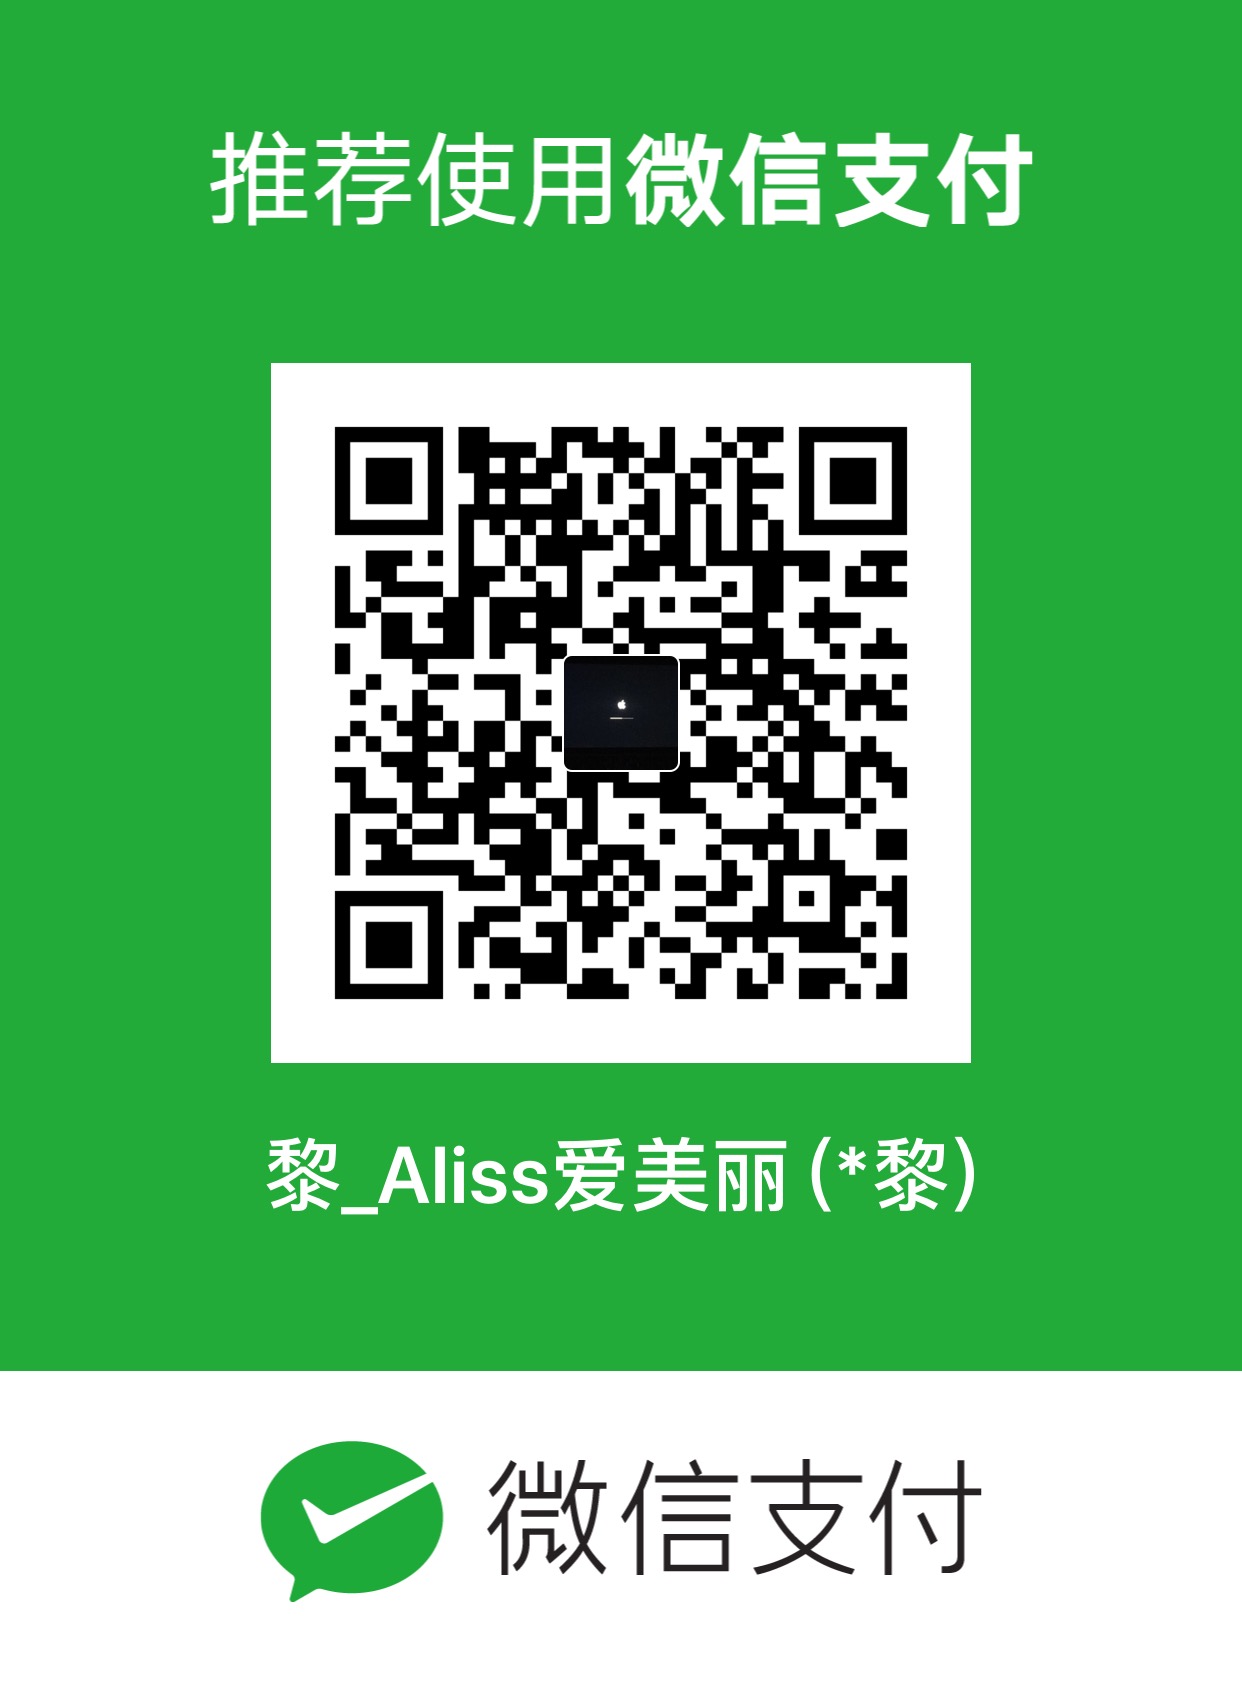 Aliss WeChat Pay